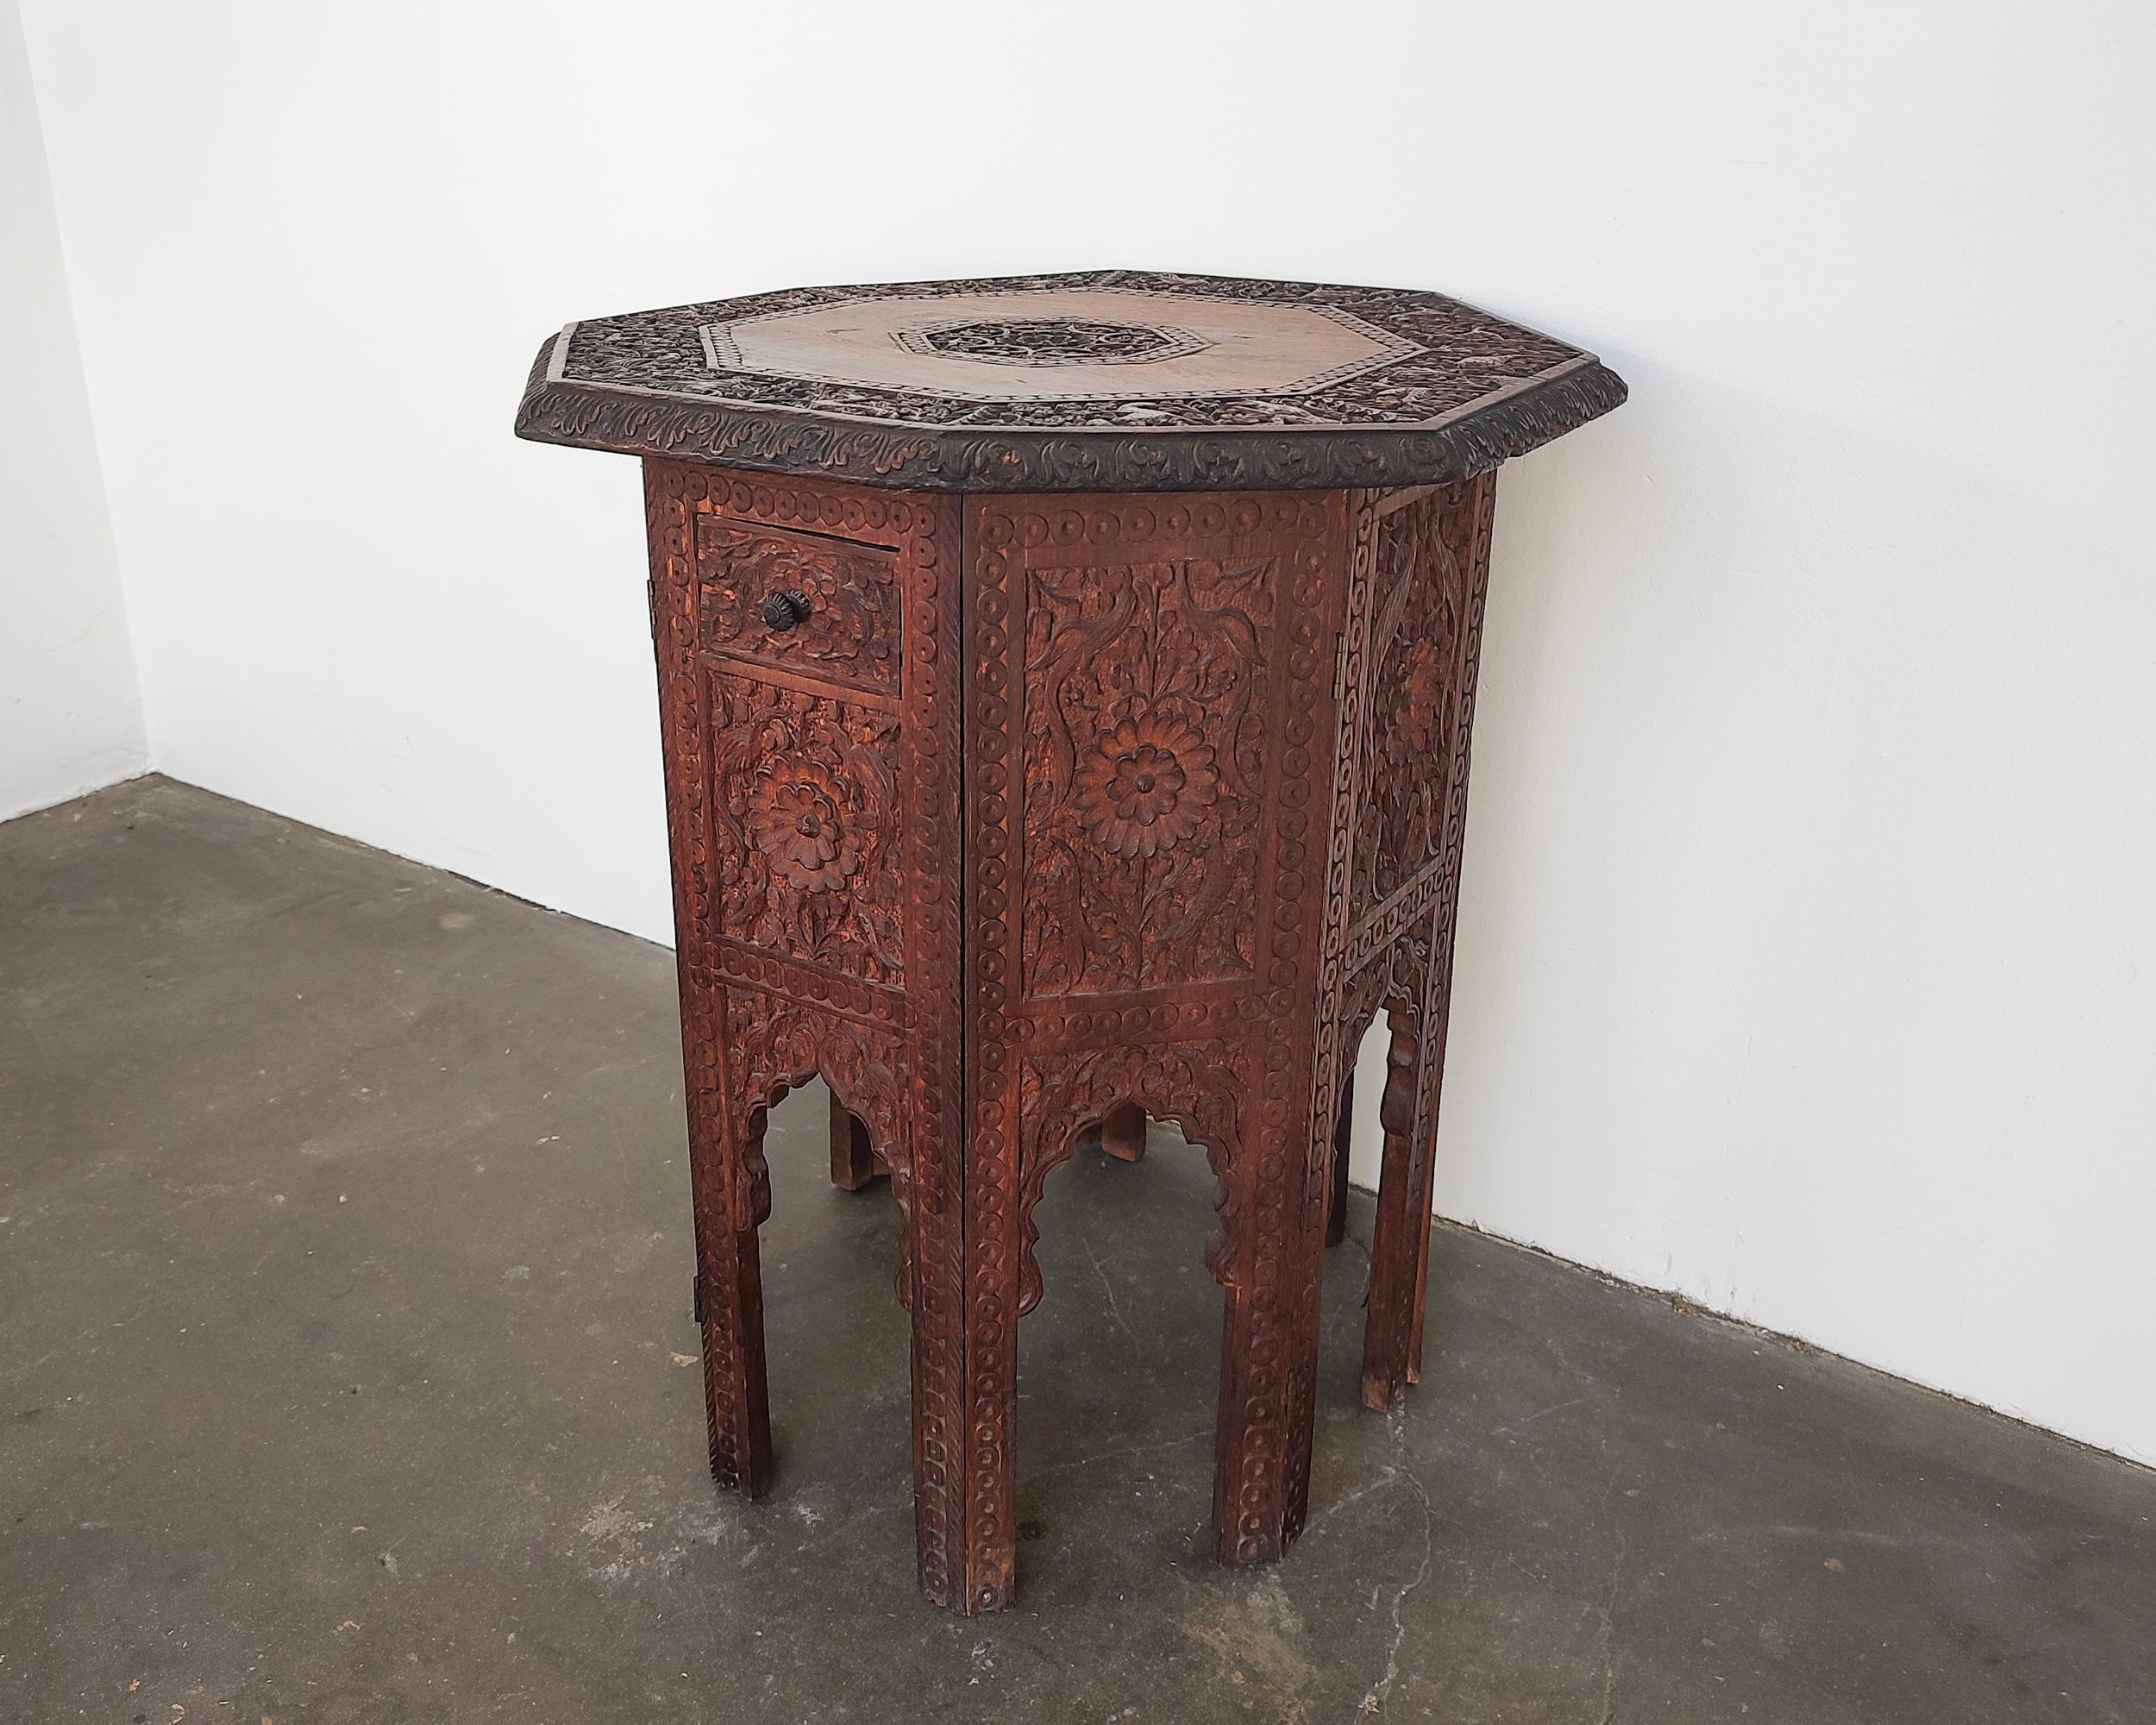 Intricate hand-carved antique teak wood Moroccan side table. Octagonal shape with beautiful cutout arched legs. Two small drawers on either side. Overall great original condition, one small chip to wood on one of the drawer pulls.

19.5